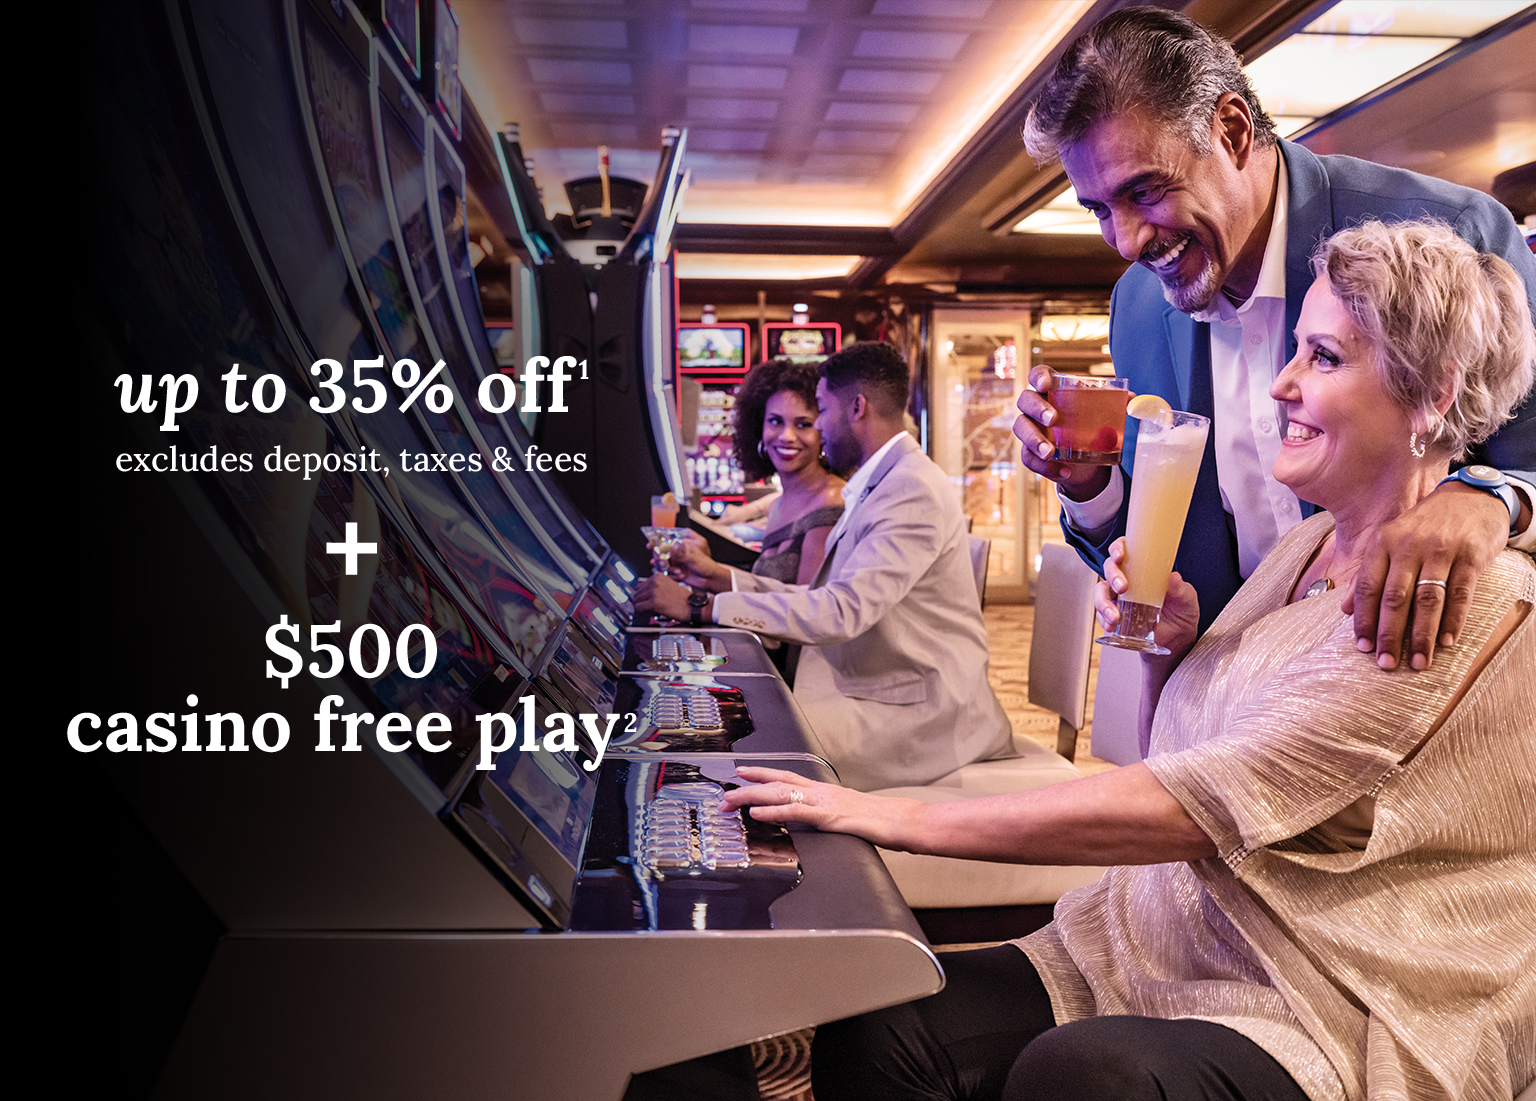 up to 35% off + $500 casino free play. Click here to book.